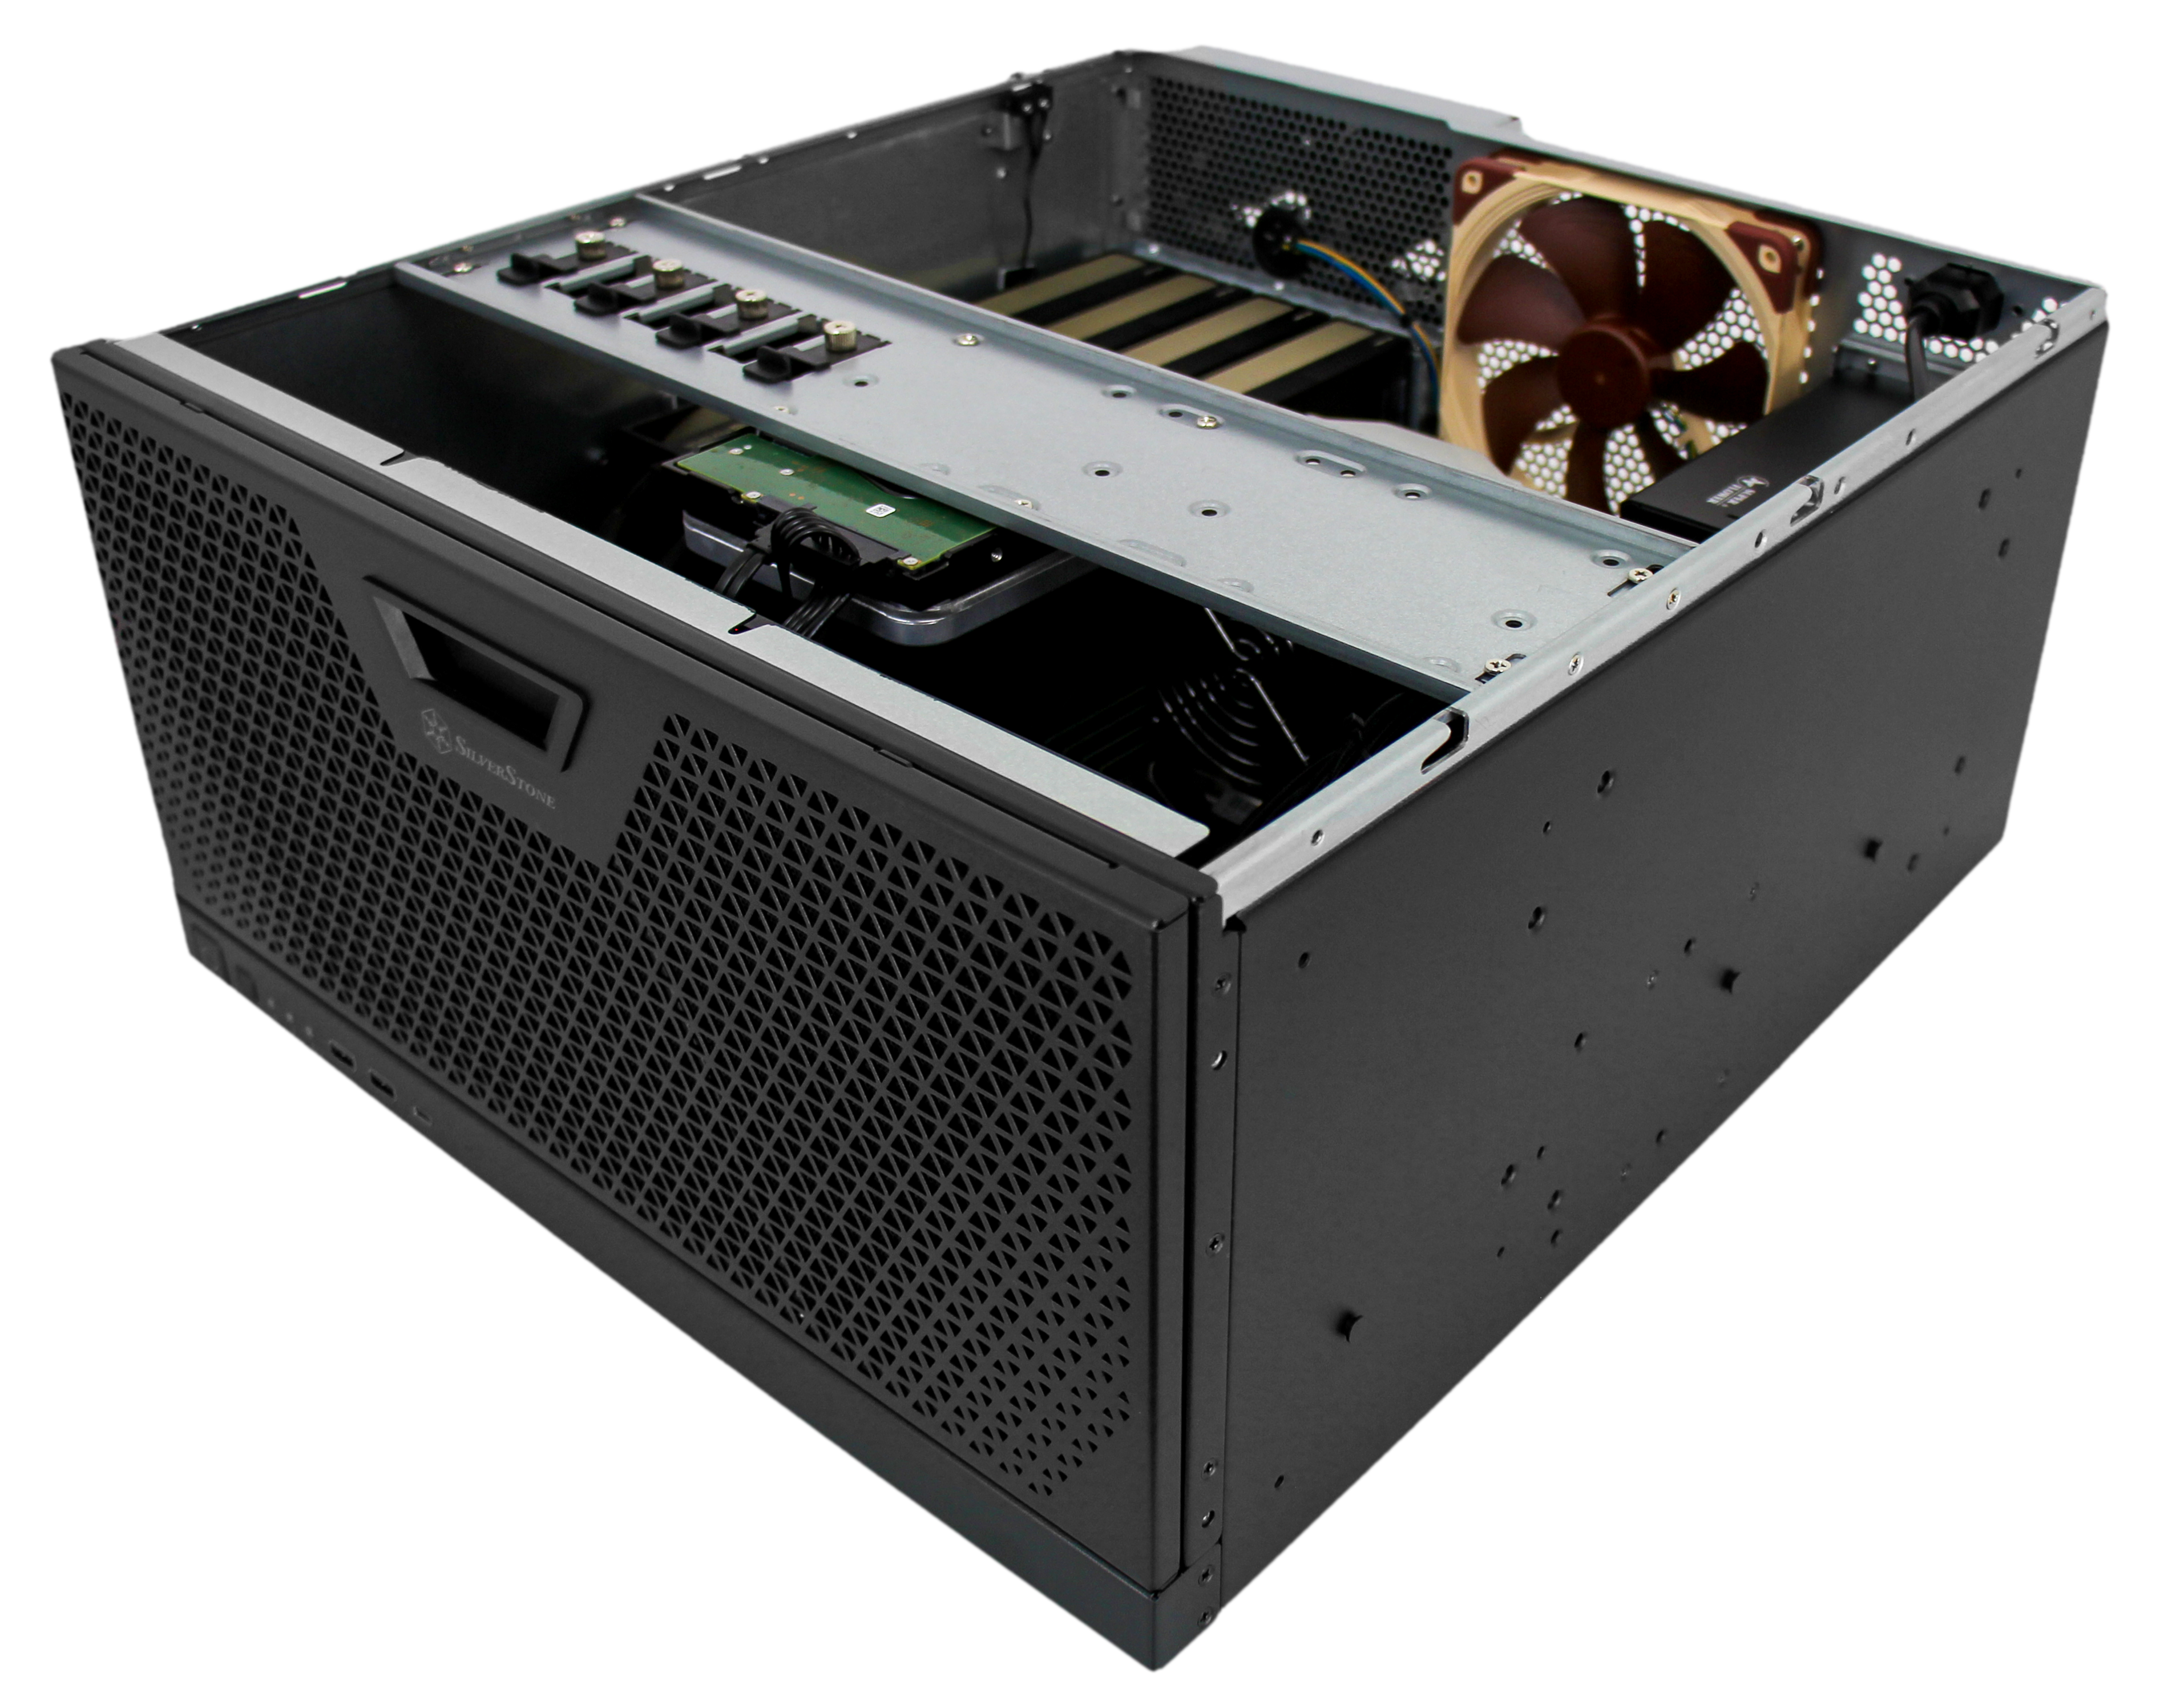 Puget Systems Quad GPU AI Training and Inference Server in Silverstone 5U Rackmount Chassis